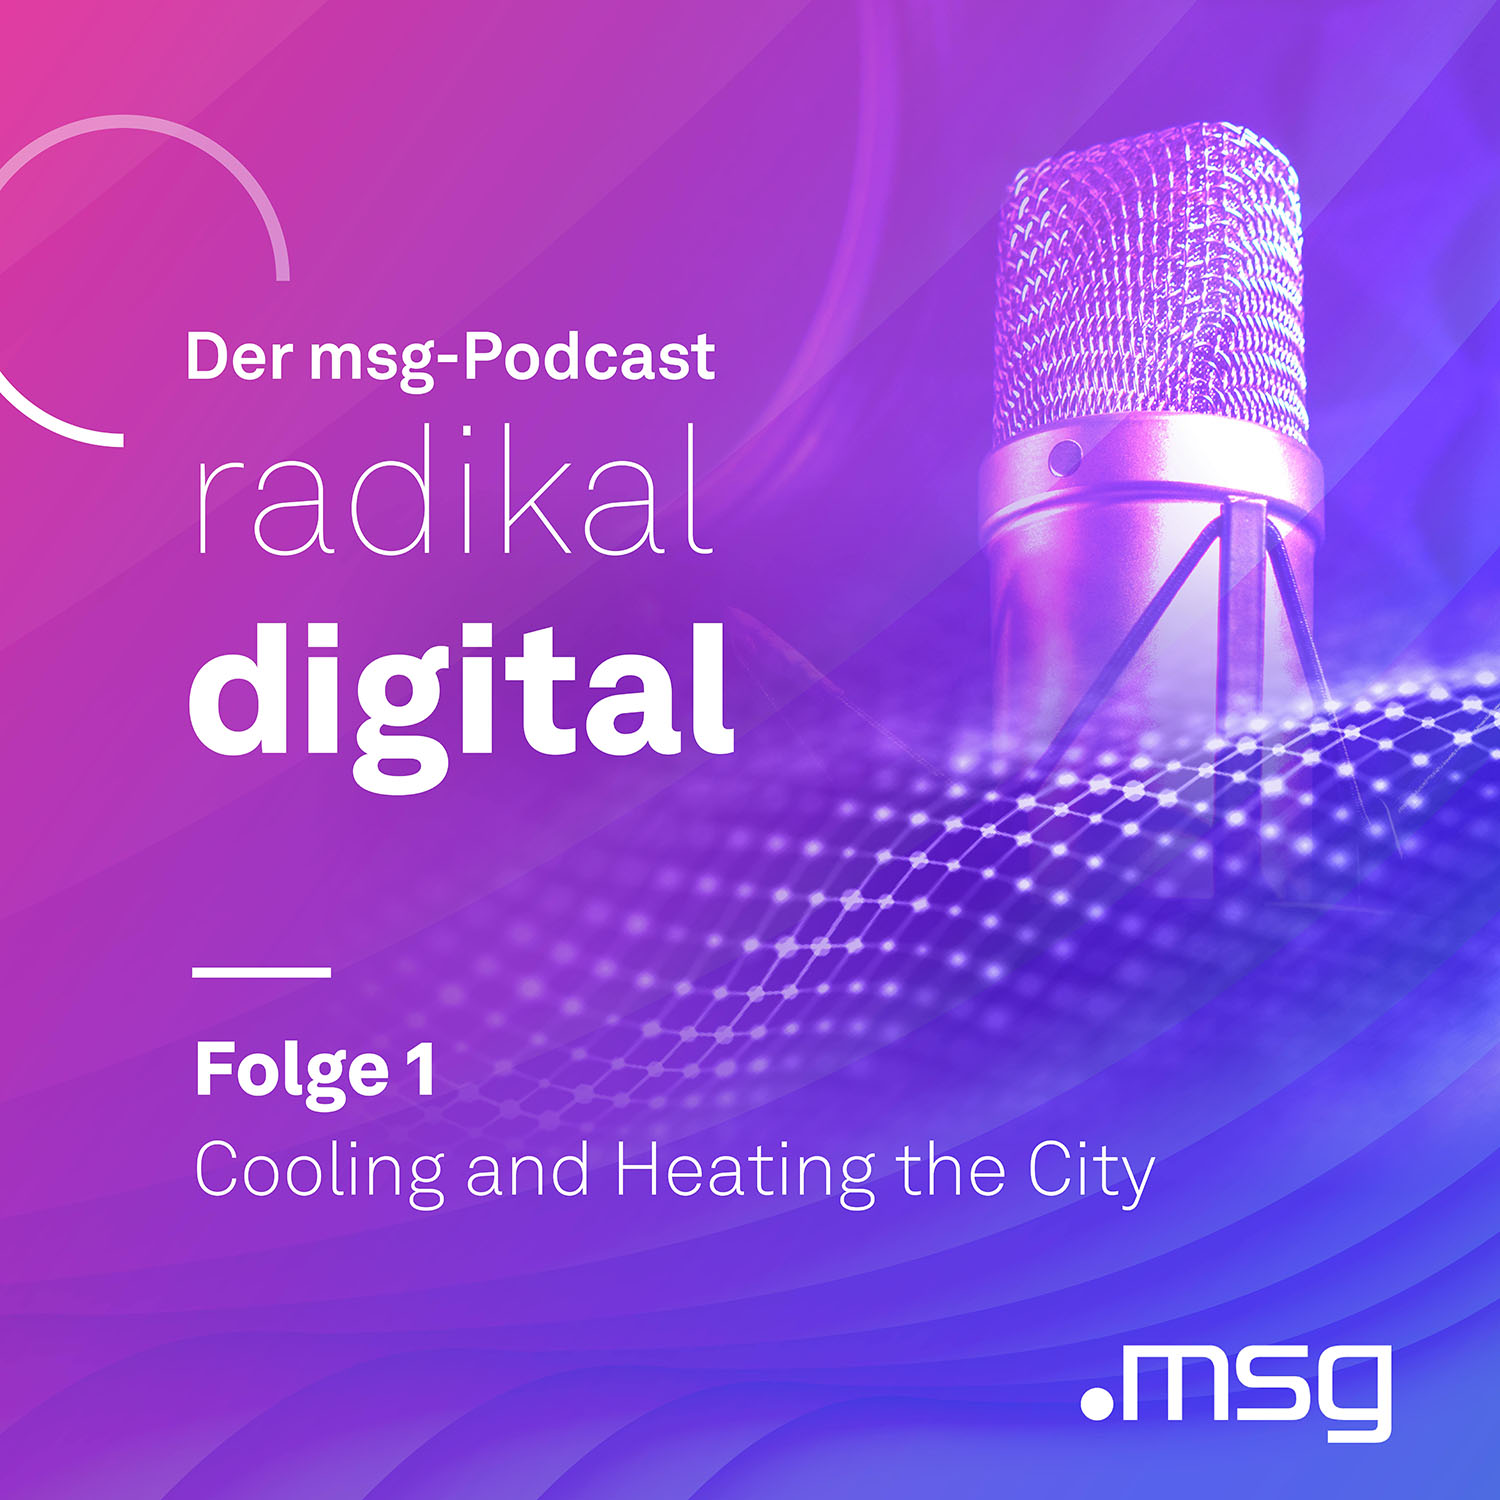 KeyVisual Folge 1 msg Podcast Cooling/Heating the City